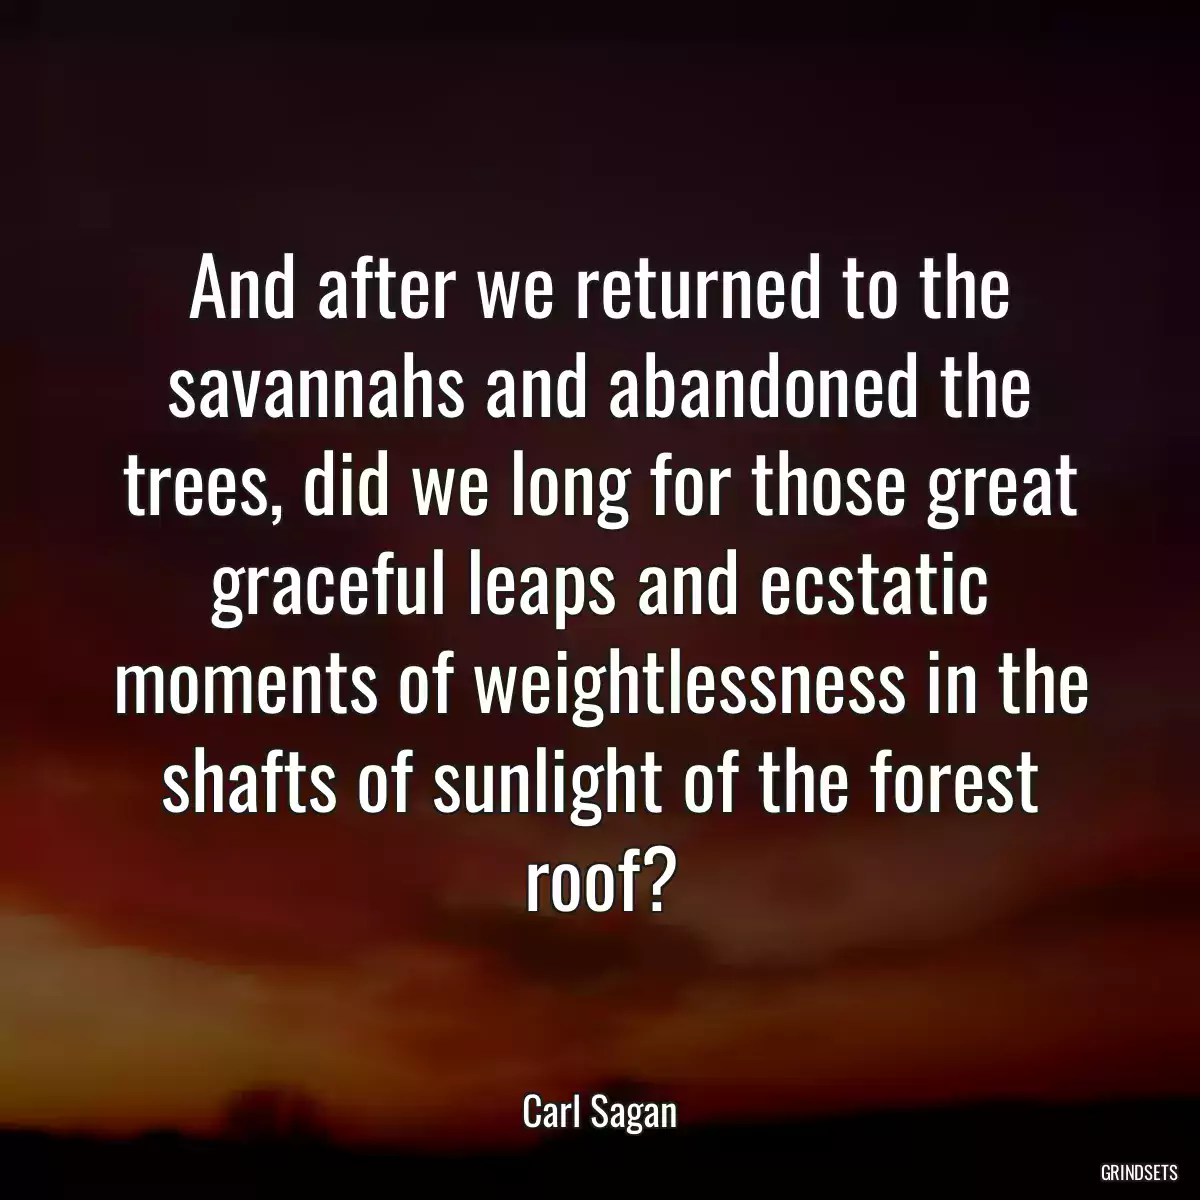 And after we returned to the savannahs and abandoned the trees, did we long for those great graceful leaps and ecstatic moments of weightlessness in the shafts of sunlight of the forest roof?